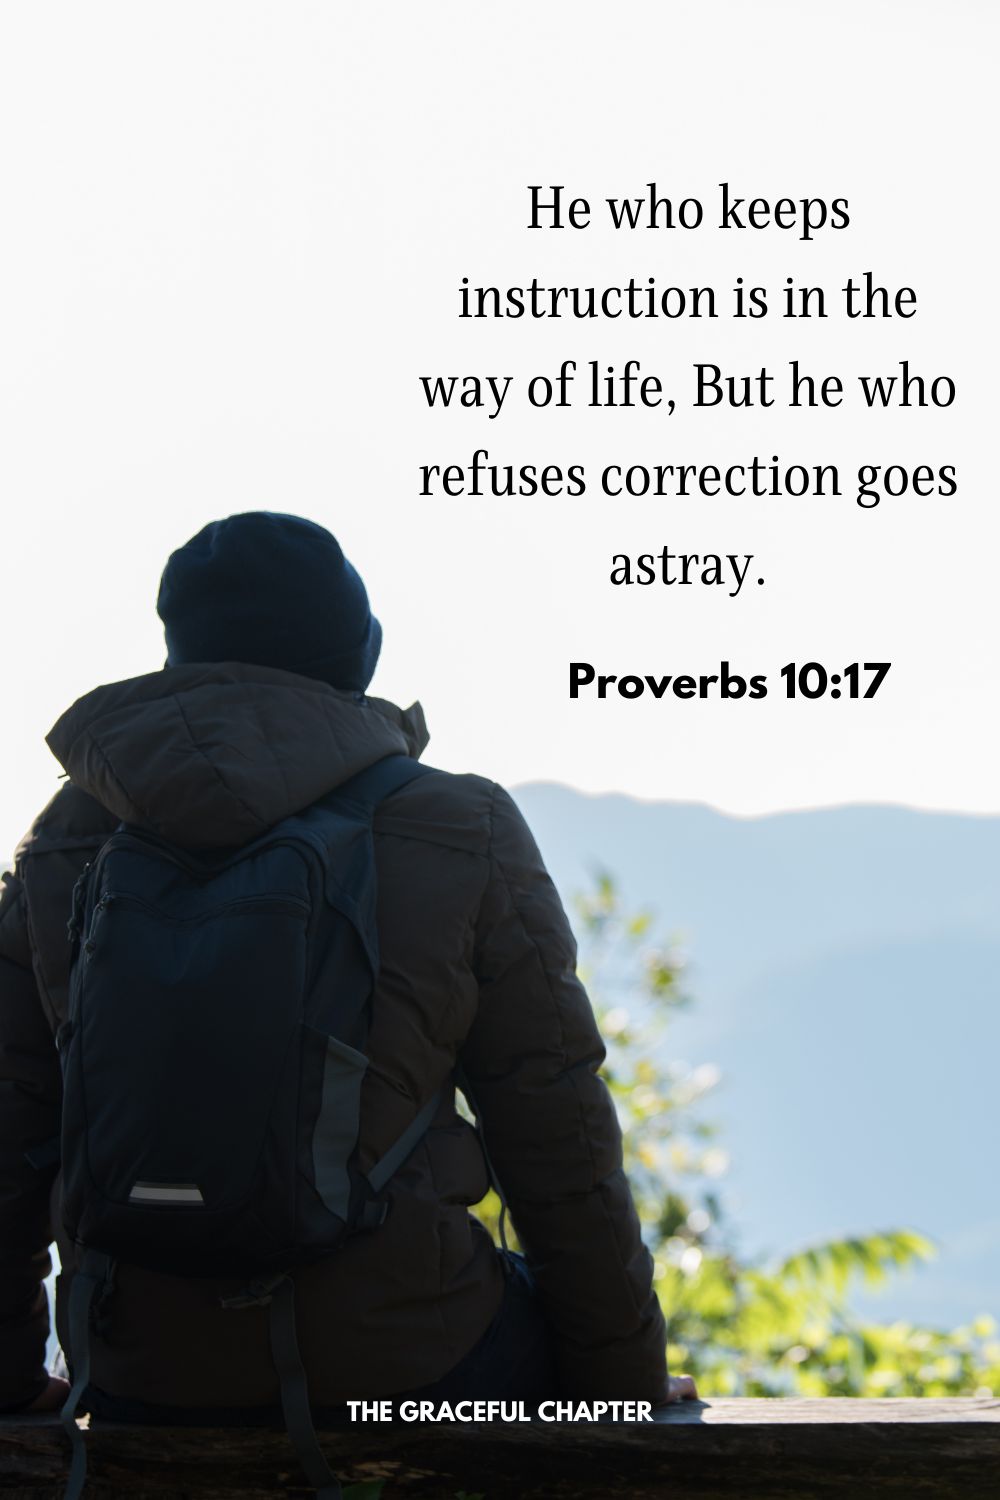 He who keeps instruction is in the way of life, But he who refuses correction goes astray. Proverbs 10:17 